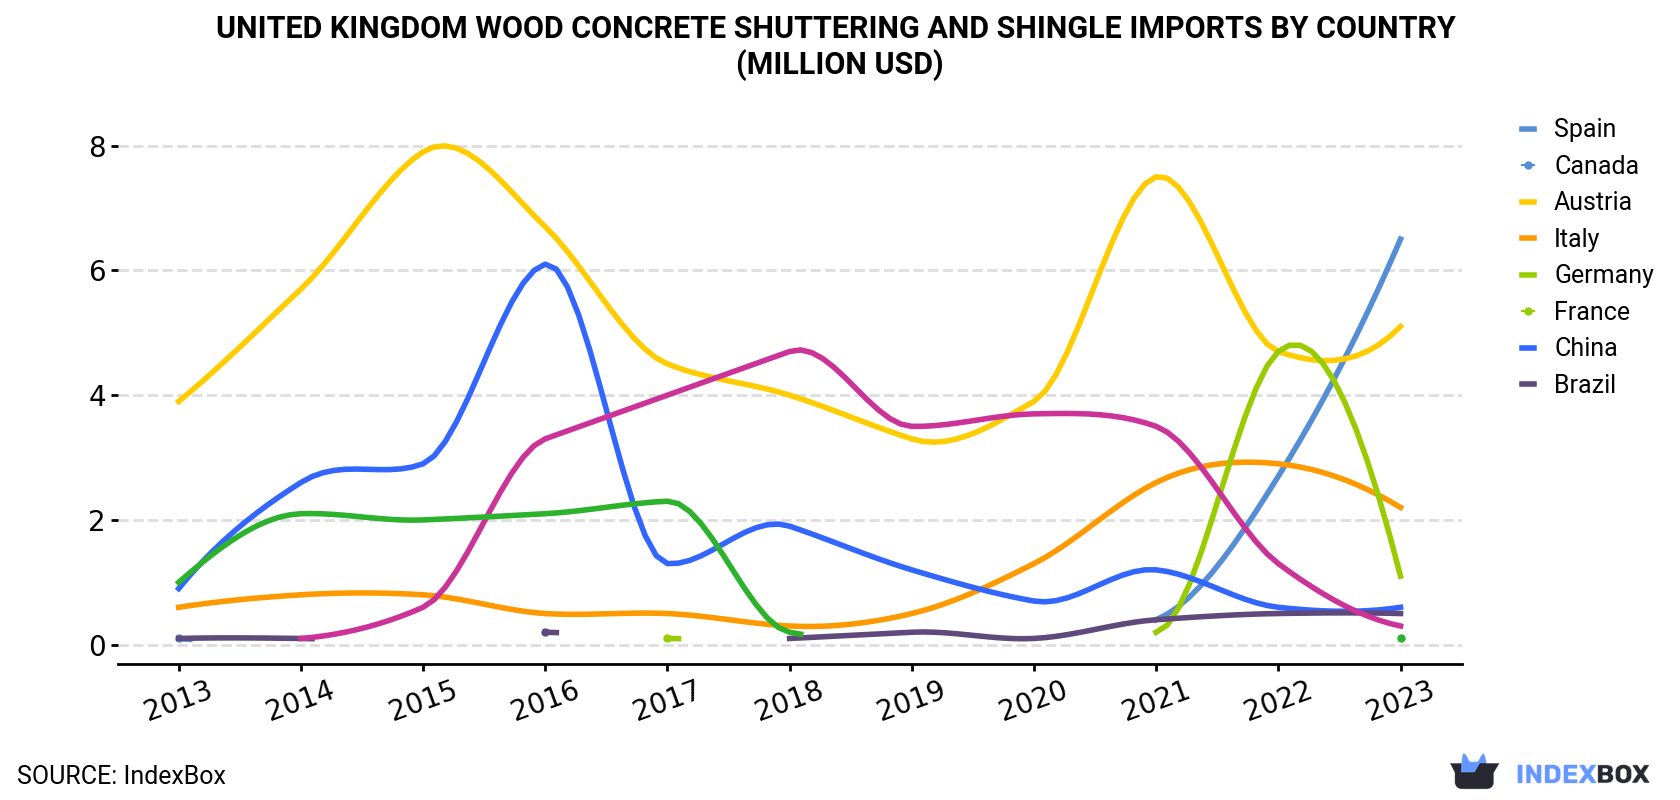 United Kingdom Wood Concrete Shuttering and Shingle Imports By Country (Million USD)